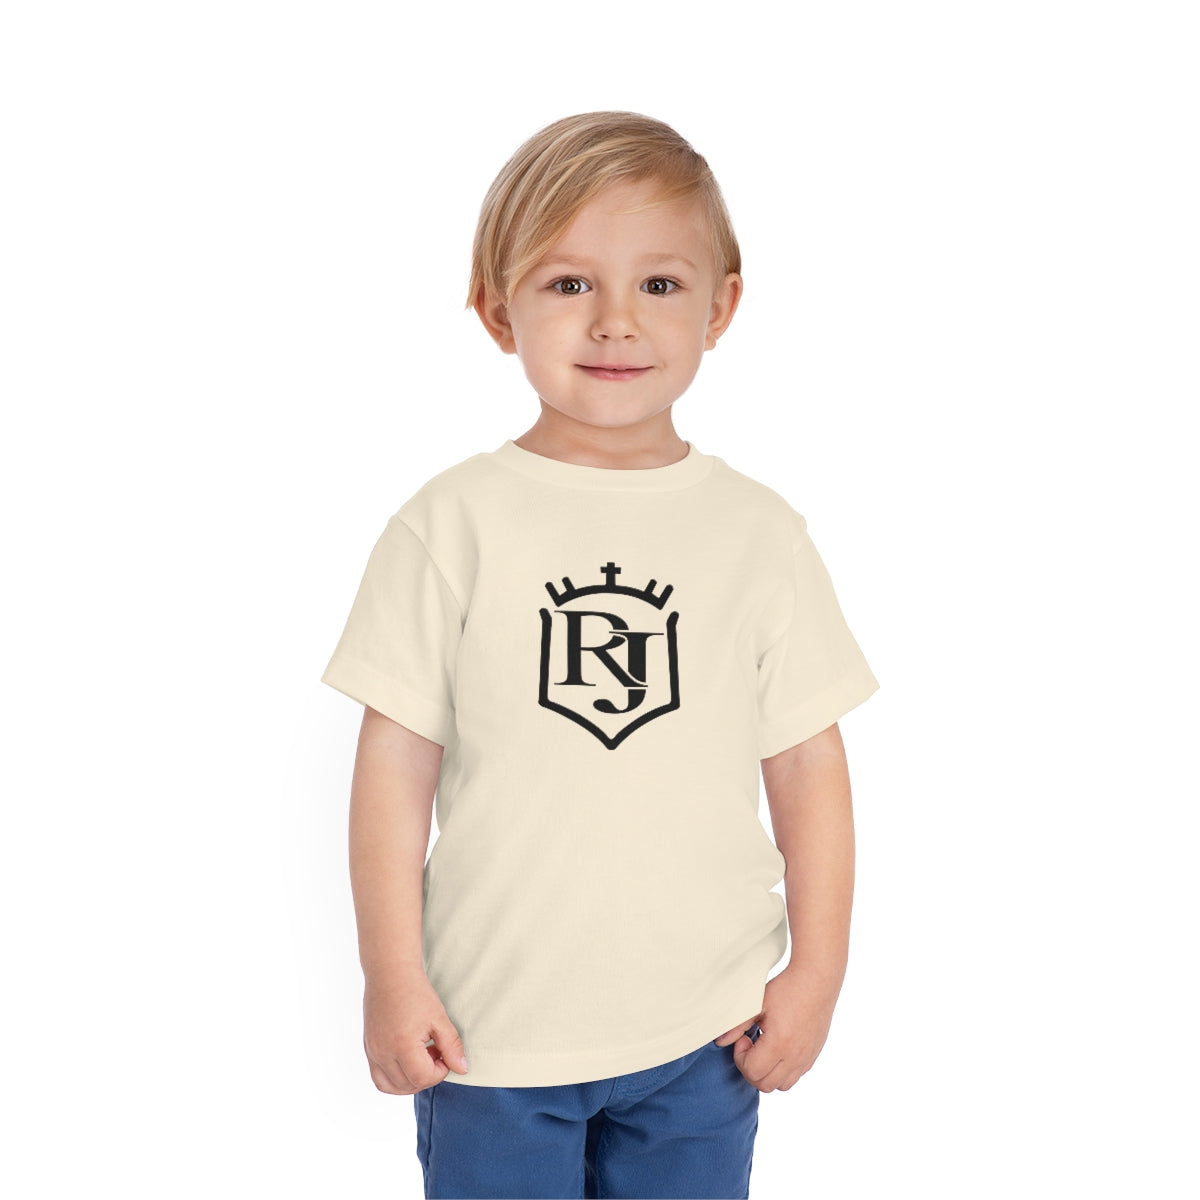 R J Escudo Toddler 2T,3T,4T,5T Short Sleeve Tee